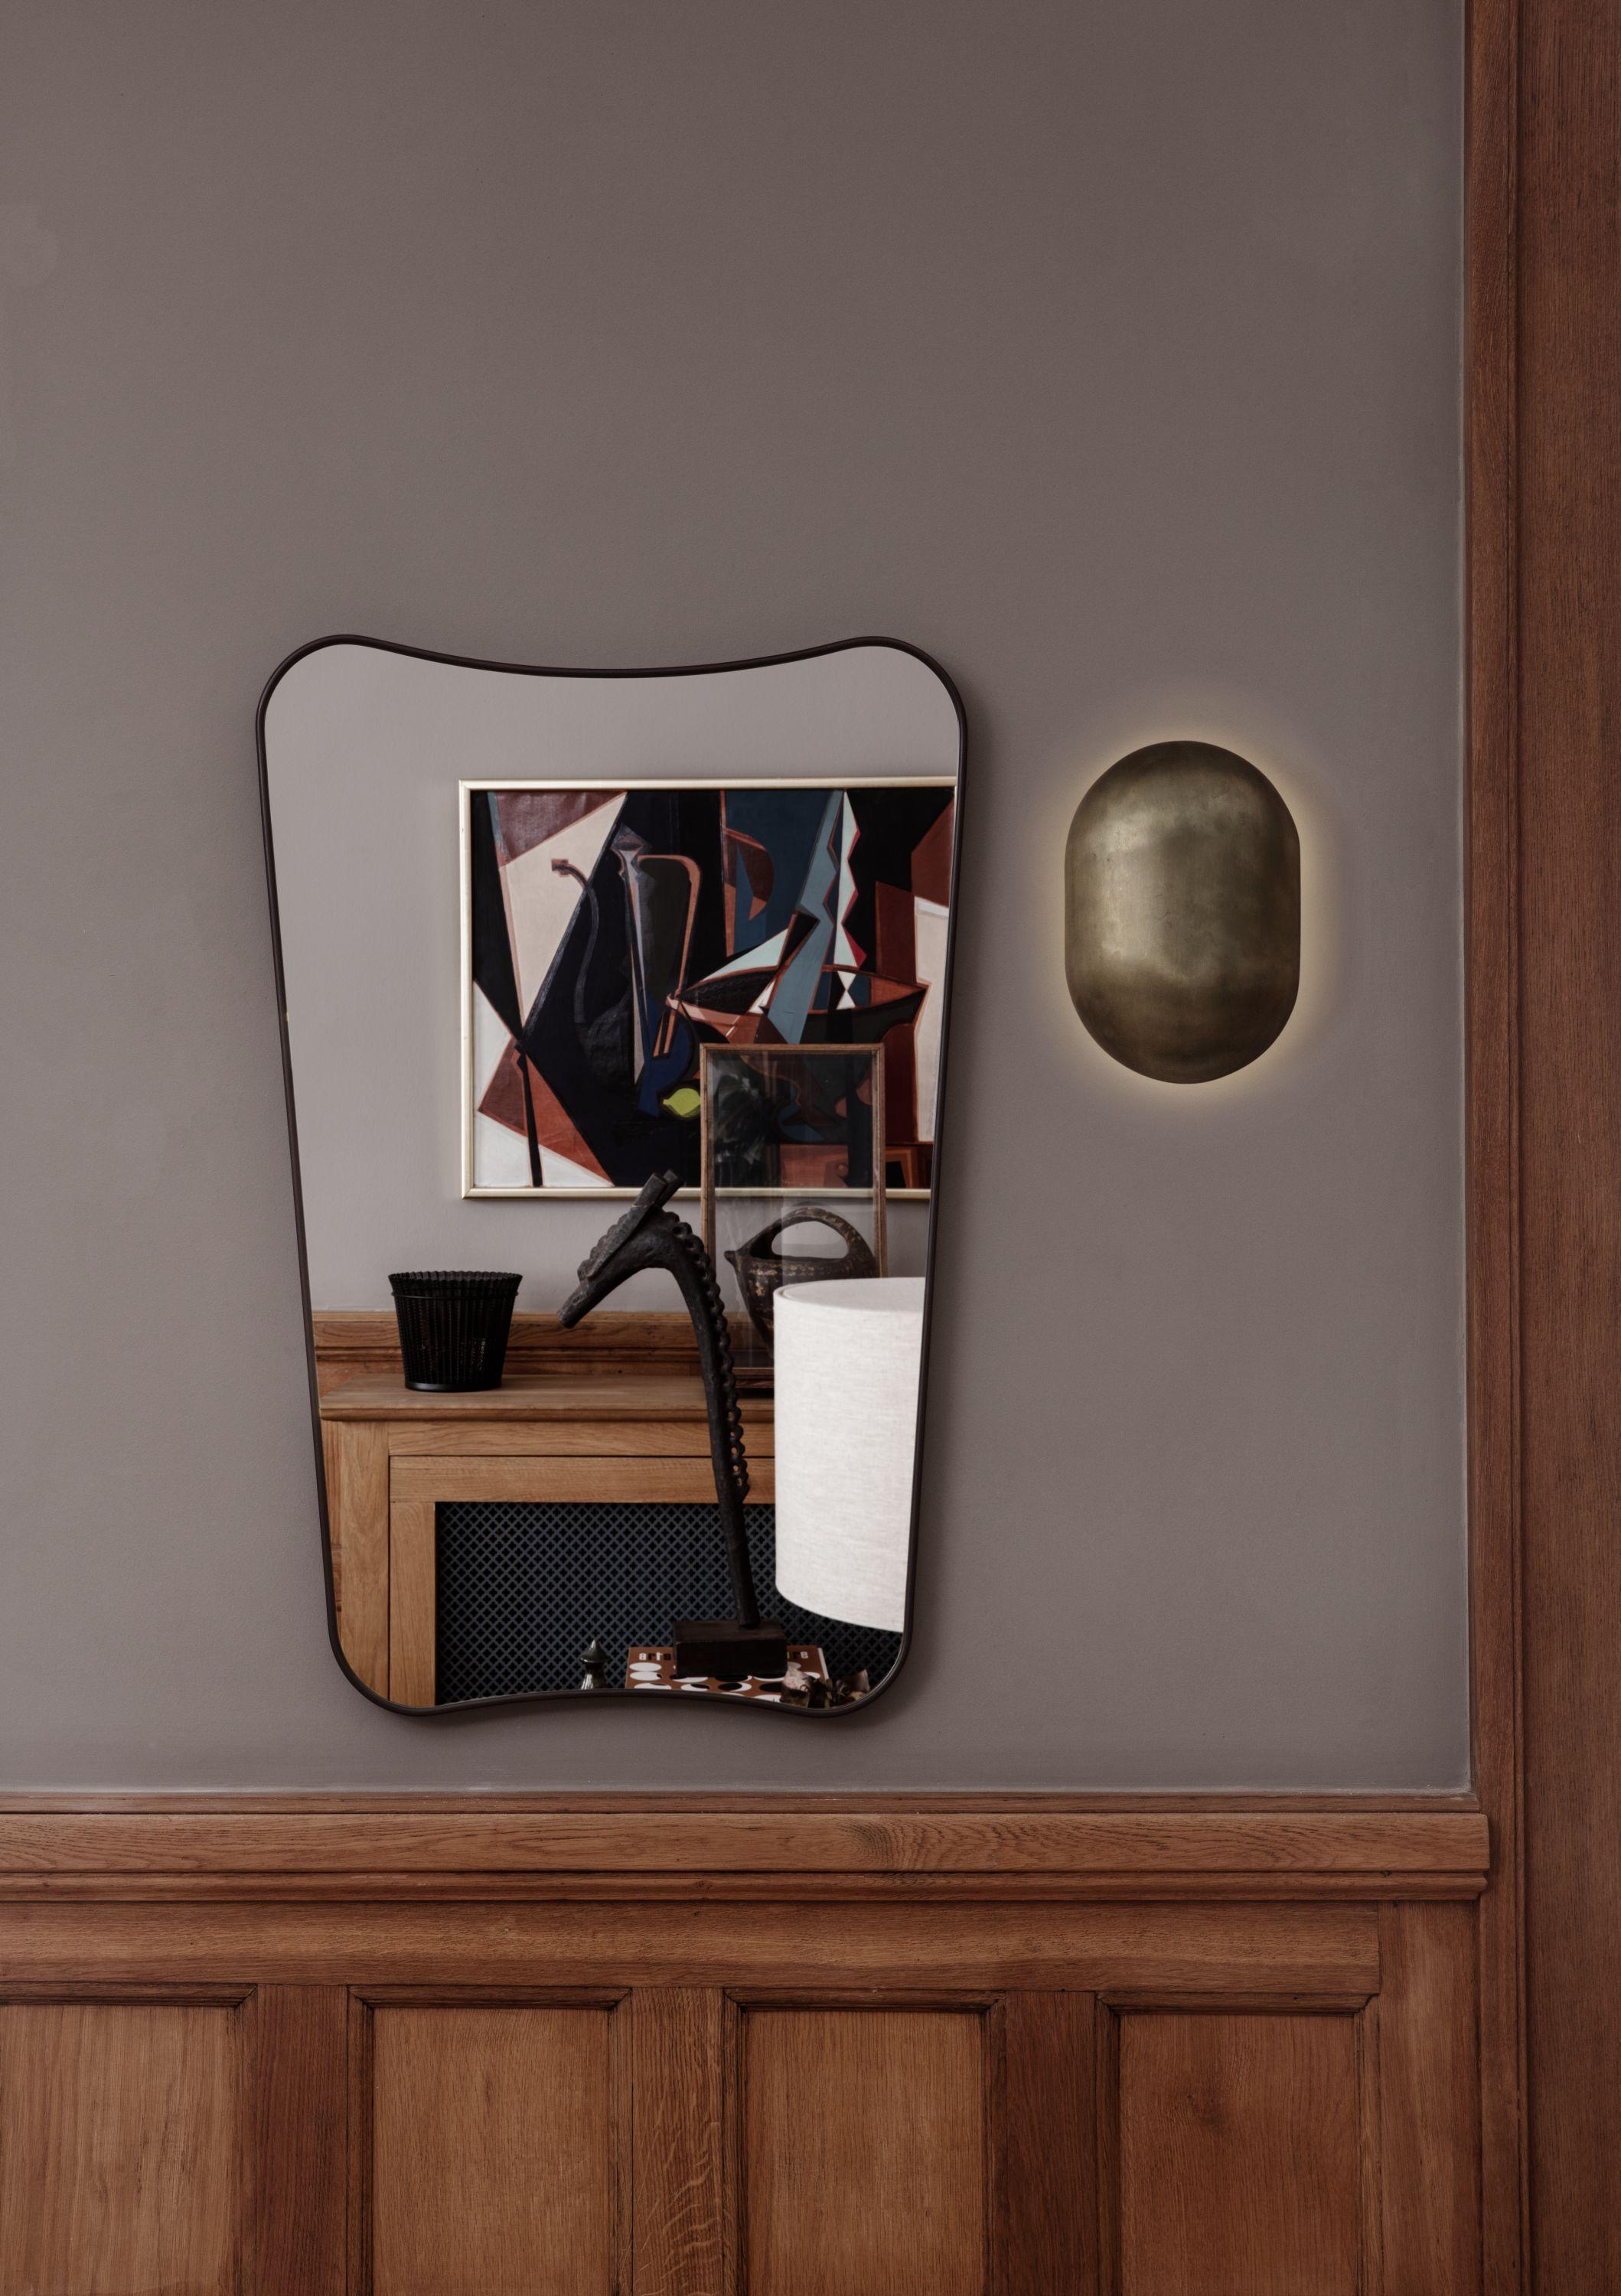 Gio Ponti F.A. 33 medium mirror in black brass. The F.A. 33 Mirror was originally designed by Gio Ponti in 1933 for Fontana Arte, the period’s most prominent lamp, glass, and mirror manufacturer. Executed in brass and glass. With its curved shape